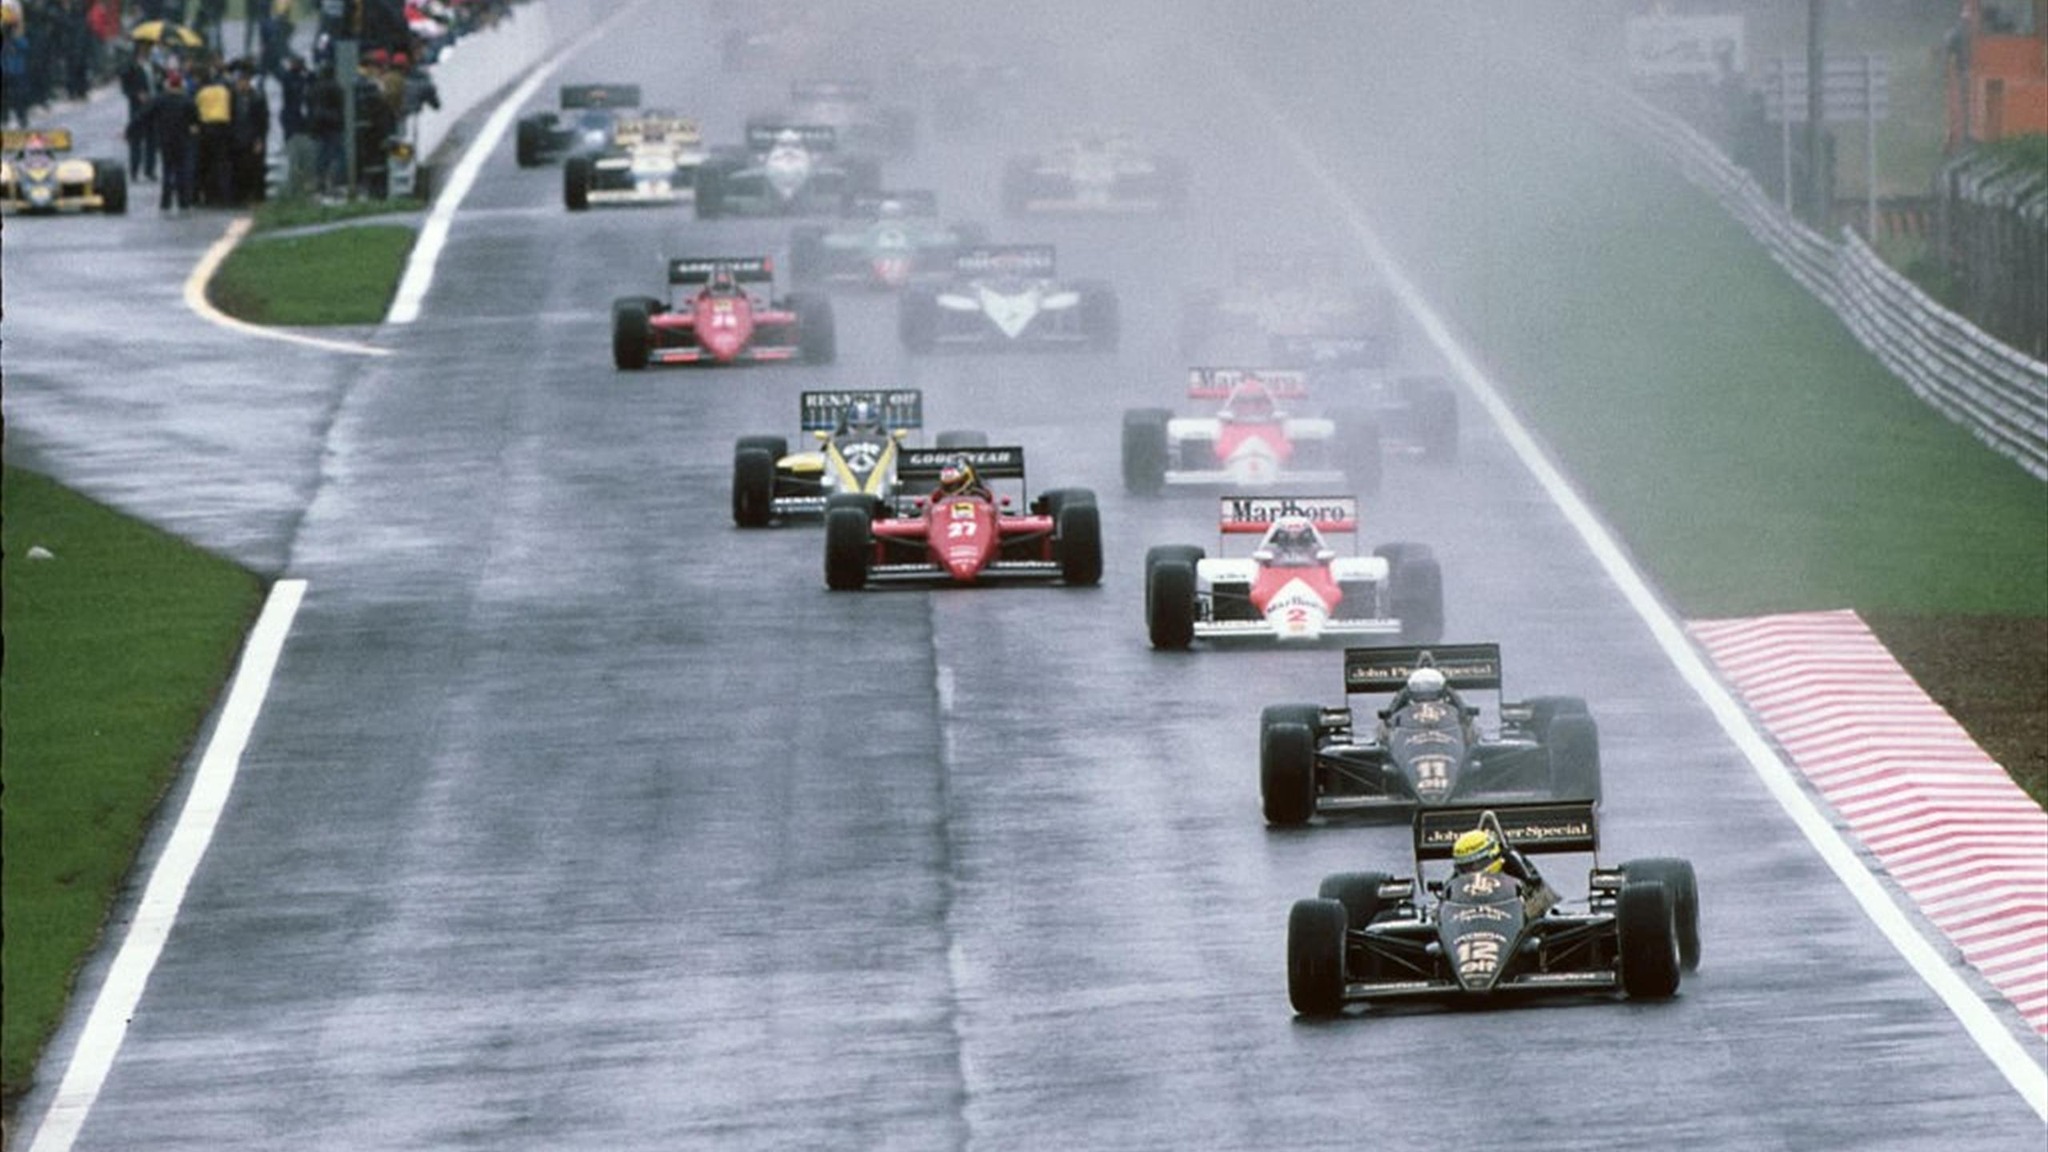 Ayrton Senna, Lotus 97T, on his way to his first victory in F1 at the Portuguese Grand Prix in Estoril on 21 April 1985.